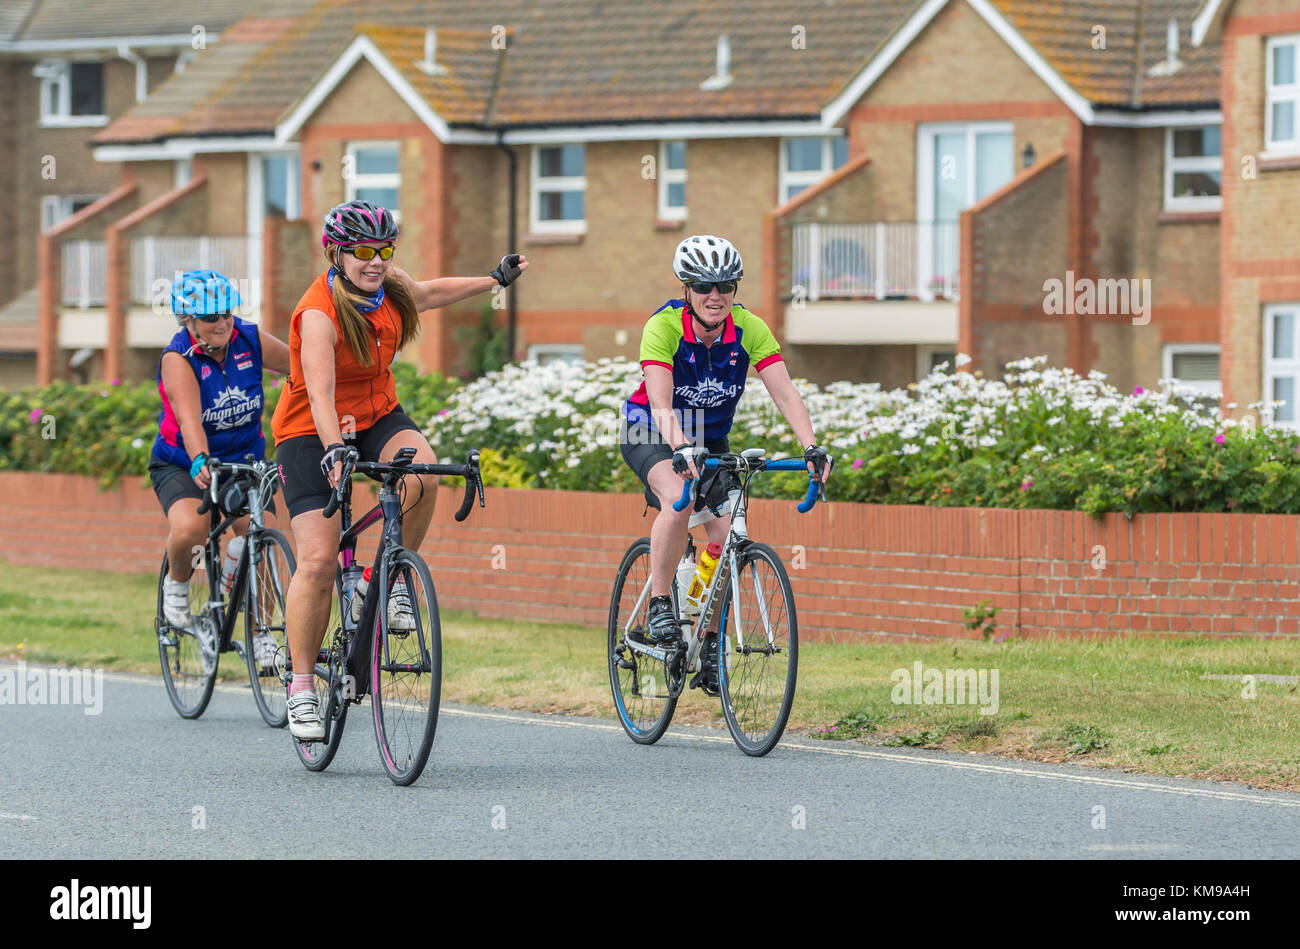 Women riding bicycles giving hand signals before turning on a road in the UK. Stock Photo